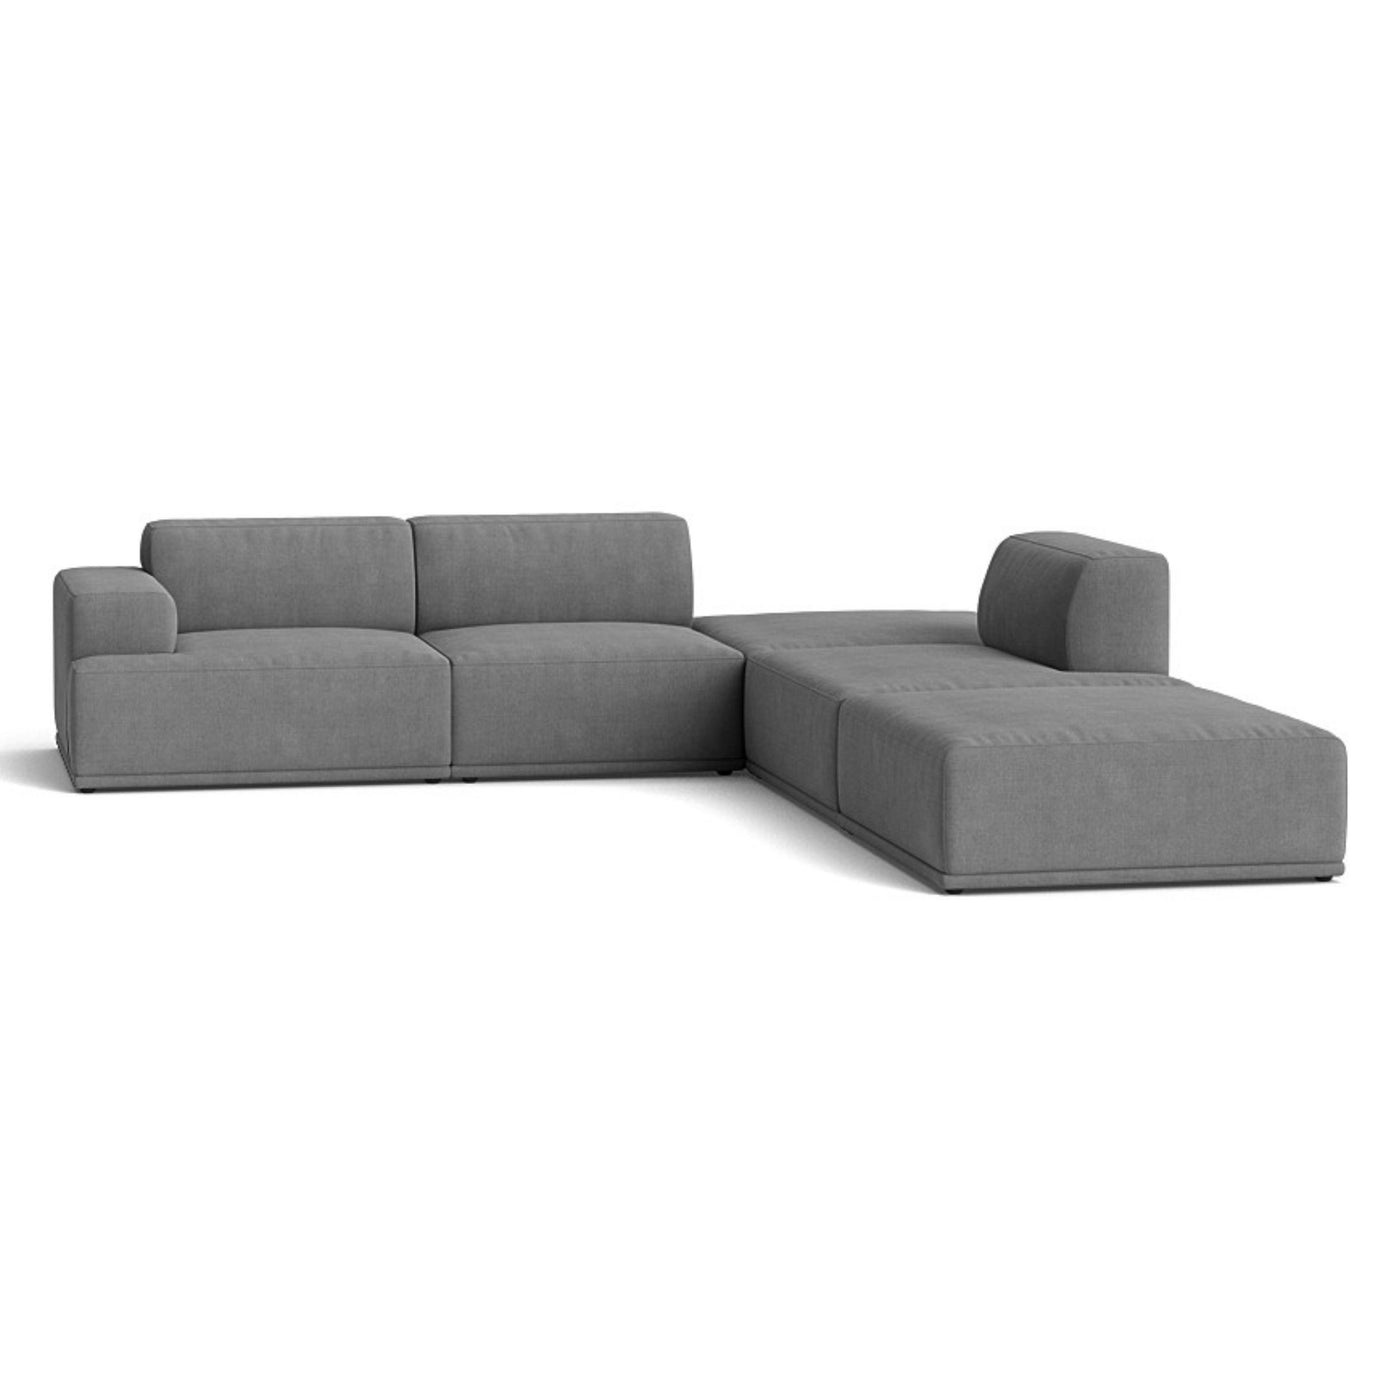 Muuto Connect Soft Modular Corner Sofa, configuration 3. made-to-order from someday designs. #colour_fiord-171